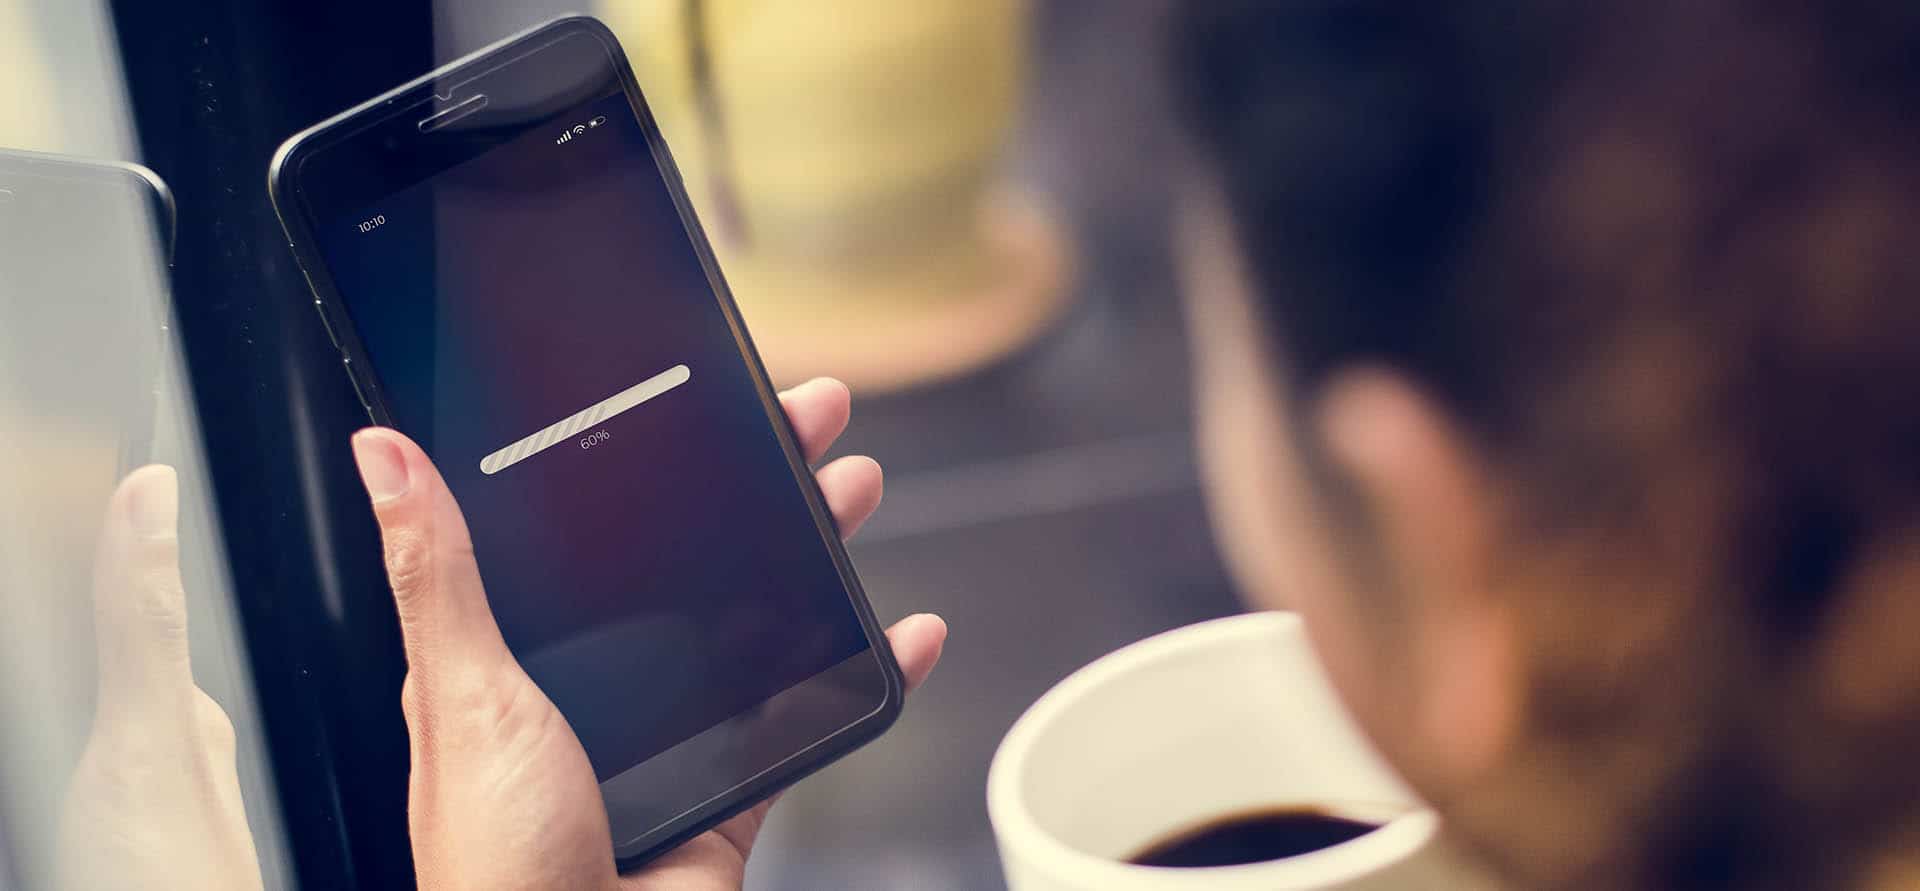 A person looks at a smartphone screen displaying a loading bar, holding a coffee cup in the other hand, with a blurred background emphasizing focus on the phone.